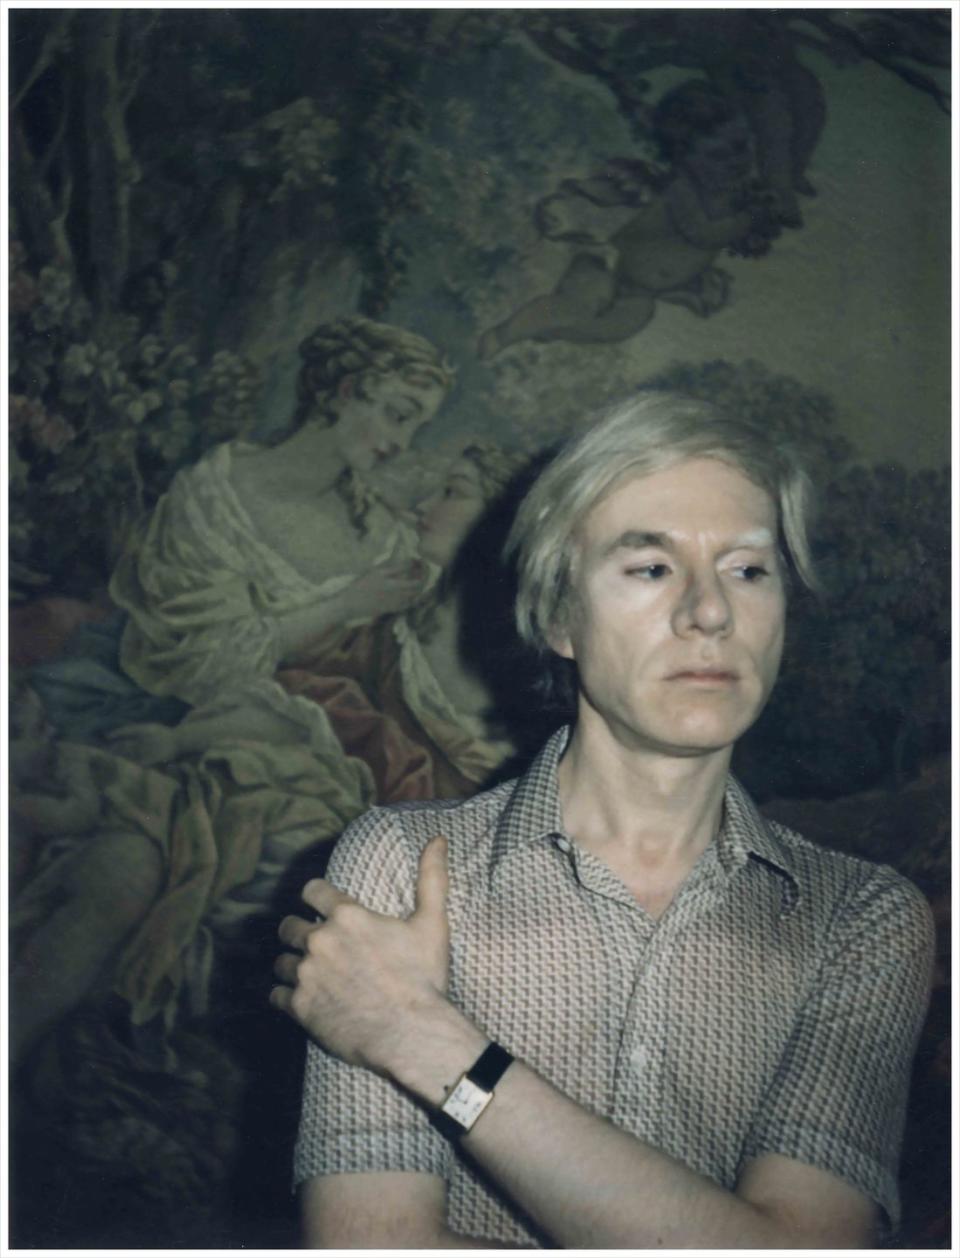 18) Andy Warhol wore one, but only for show.